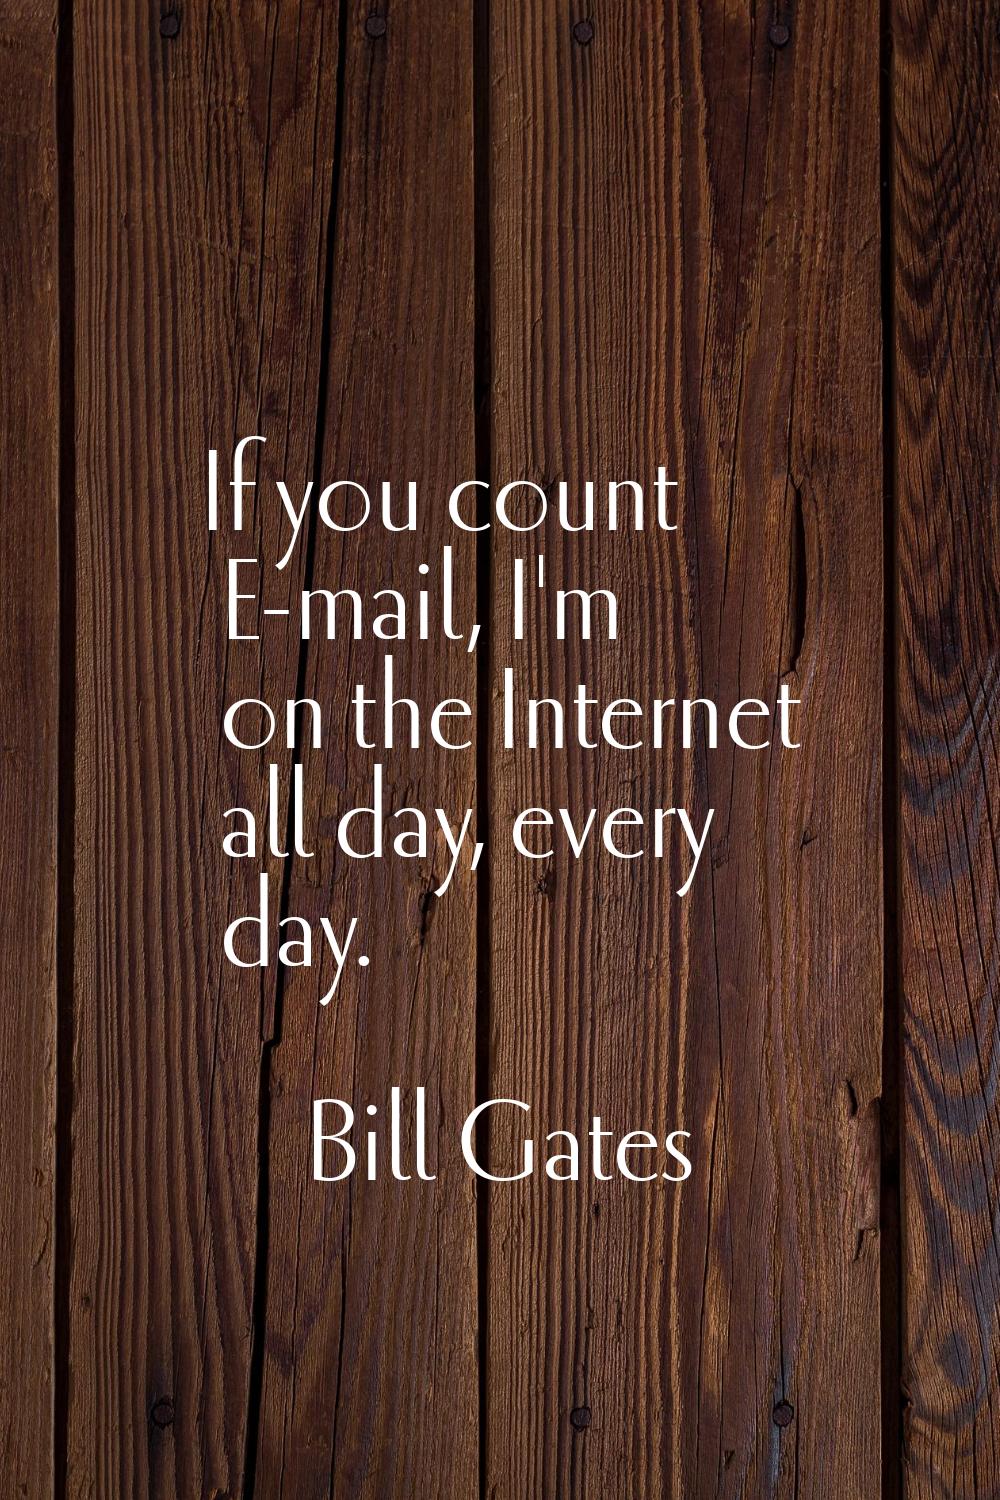 If you count E-mail, I'm on the Internet all day, every day.